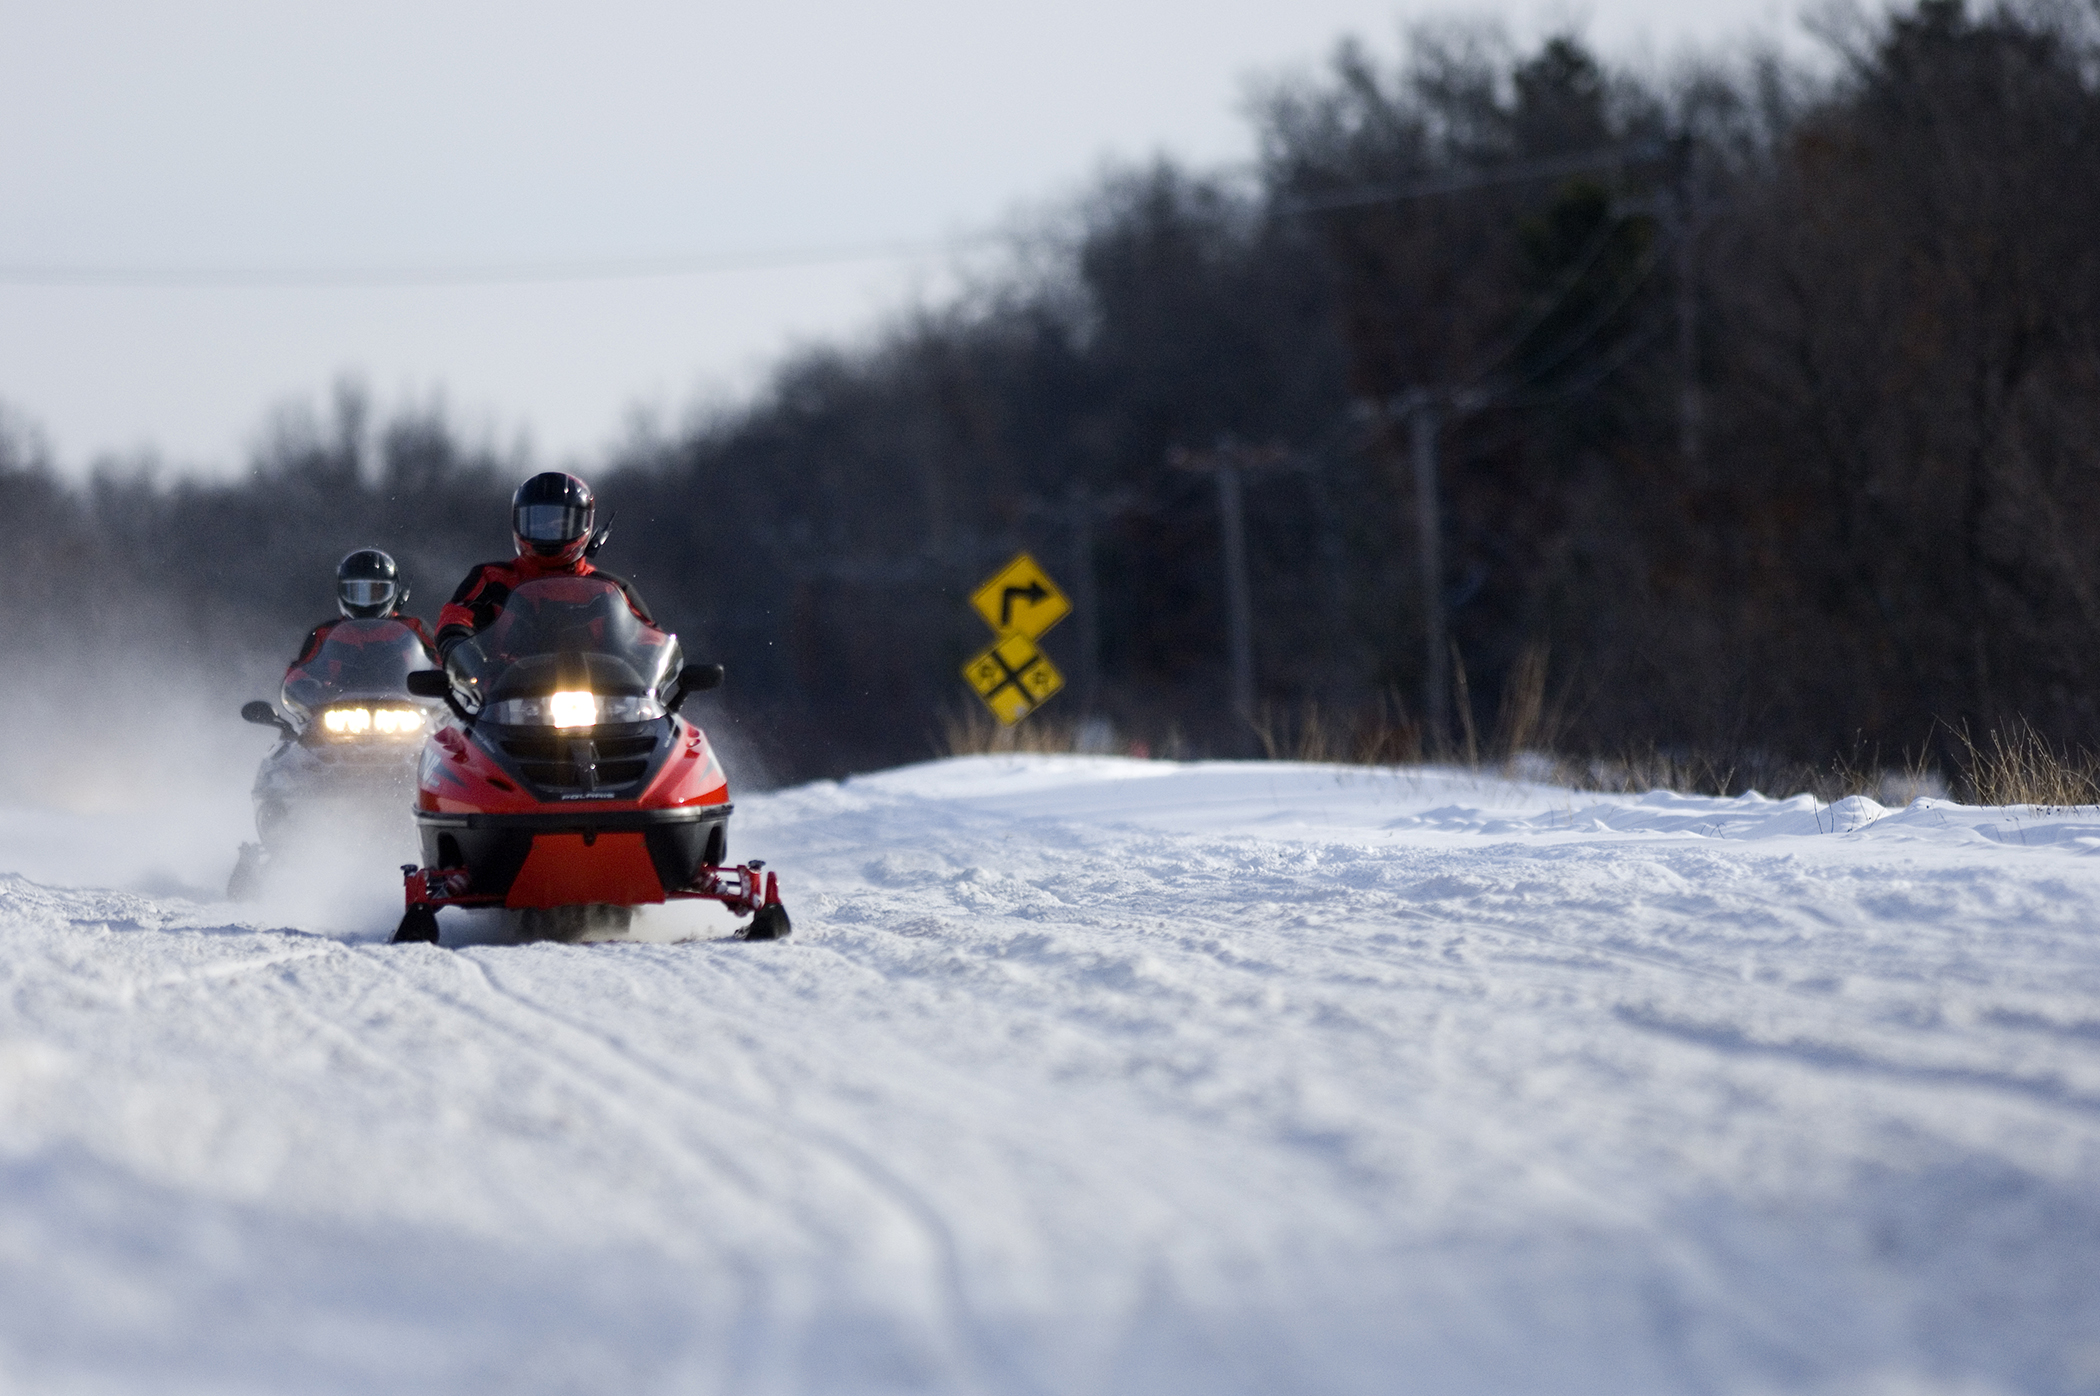 Trail permit dollars are backbone of state's snowmobiling program